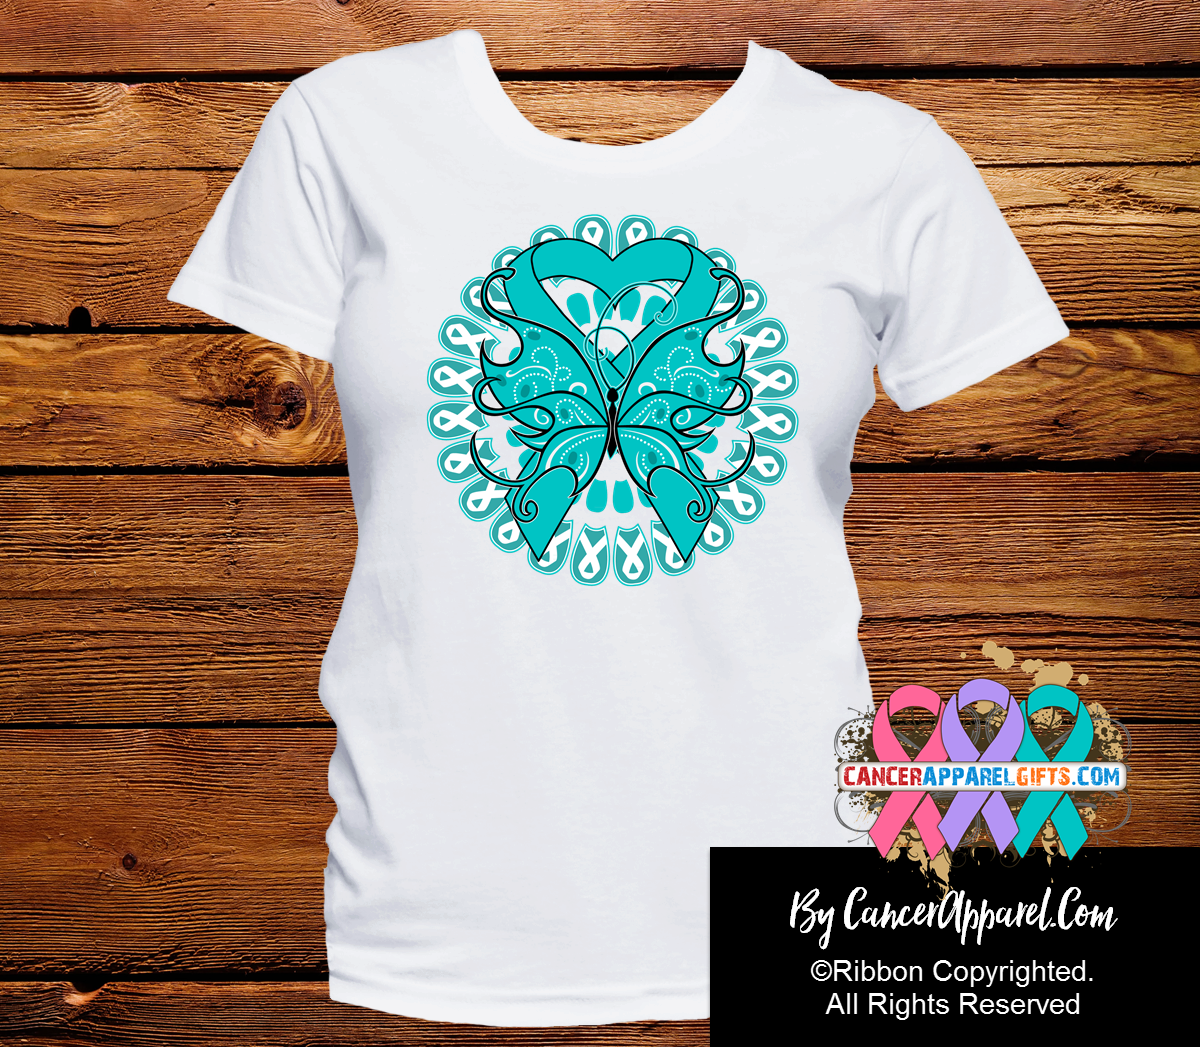 Ovarian Cancer Stunning Butterfly Shirts - Cancer Apparel and Gifts